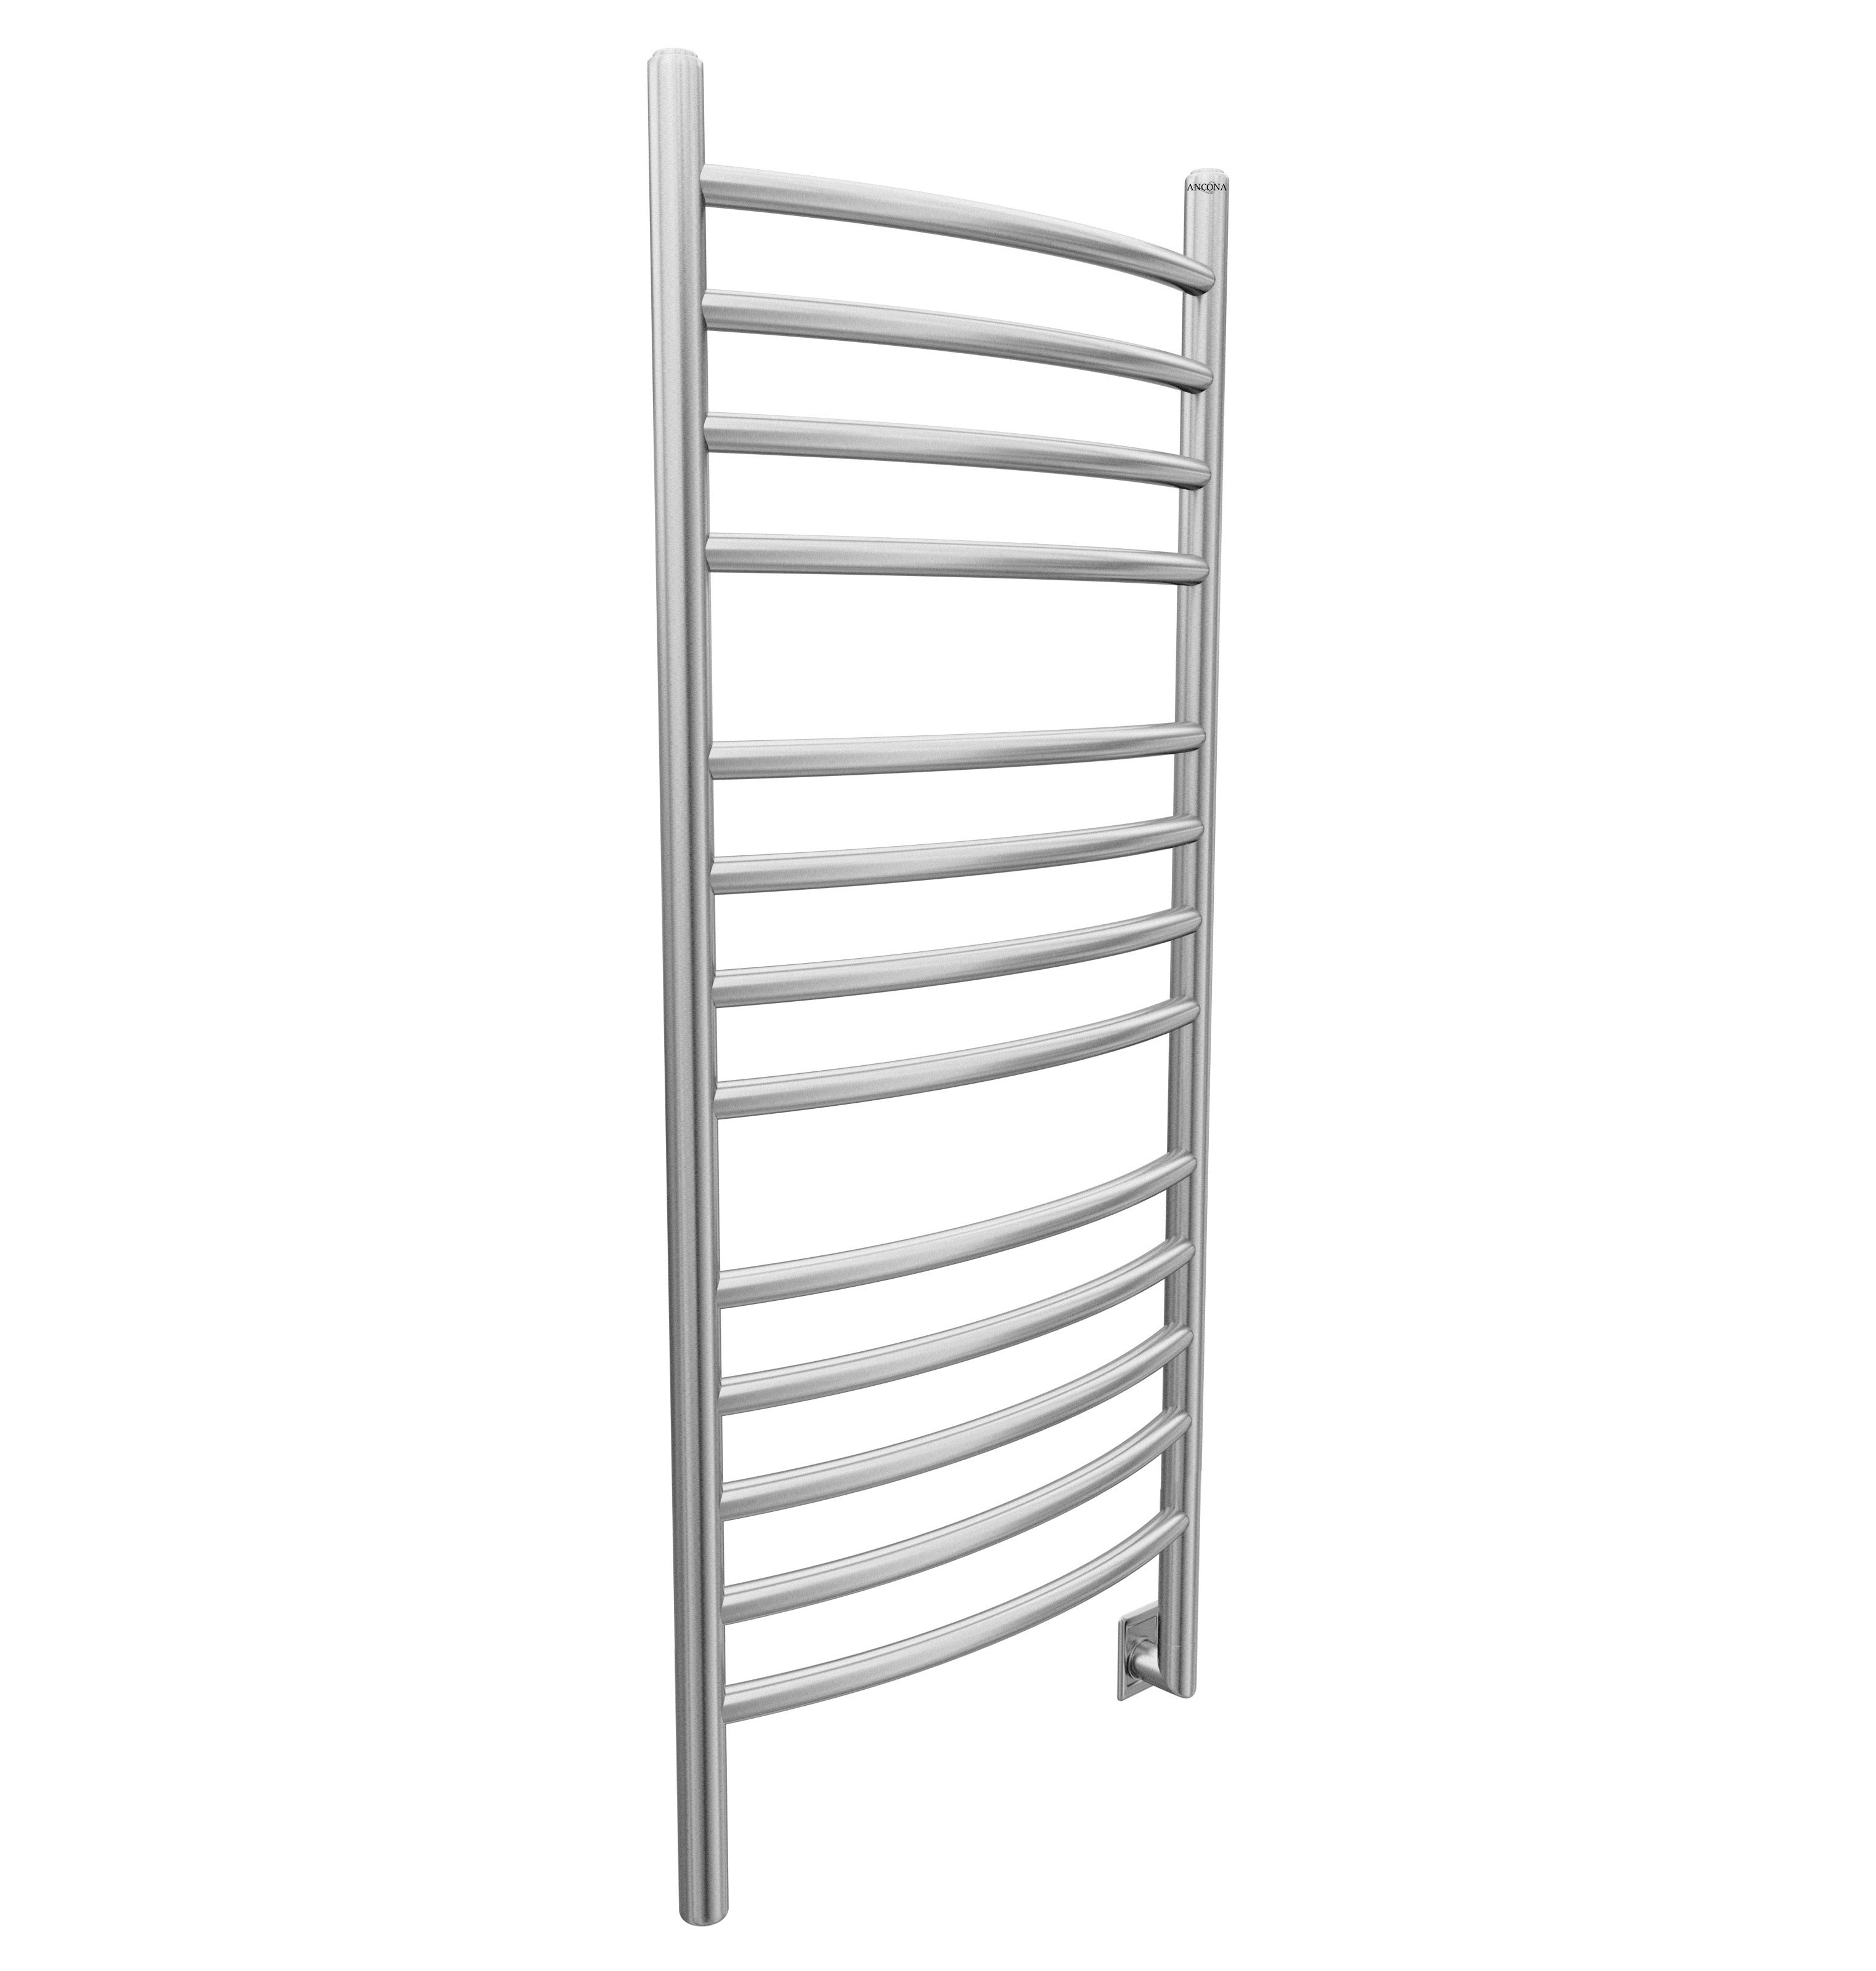 Svelte Rounded 40 in. Hardwired Electric Towel Warmer and Drying Rack in Brushed Stainless Steel